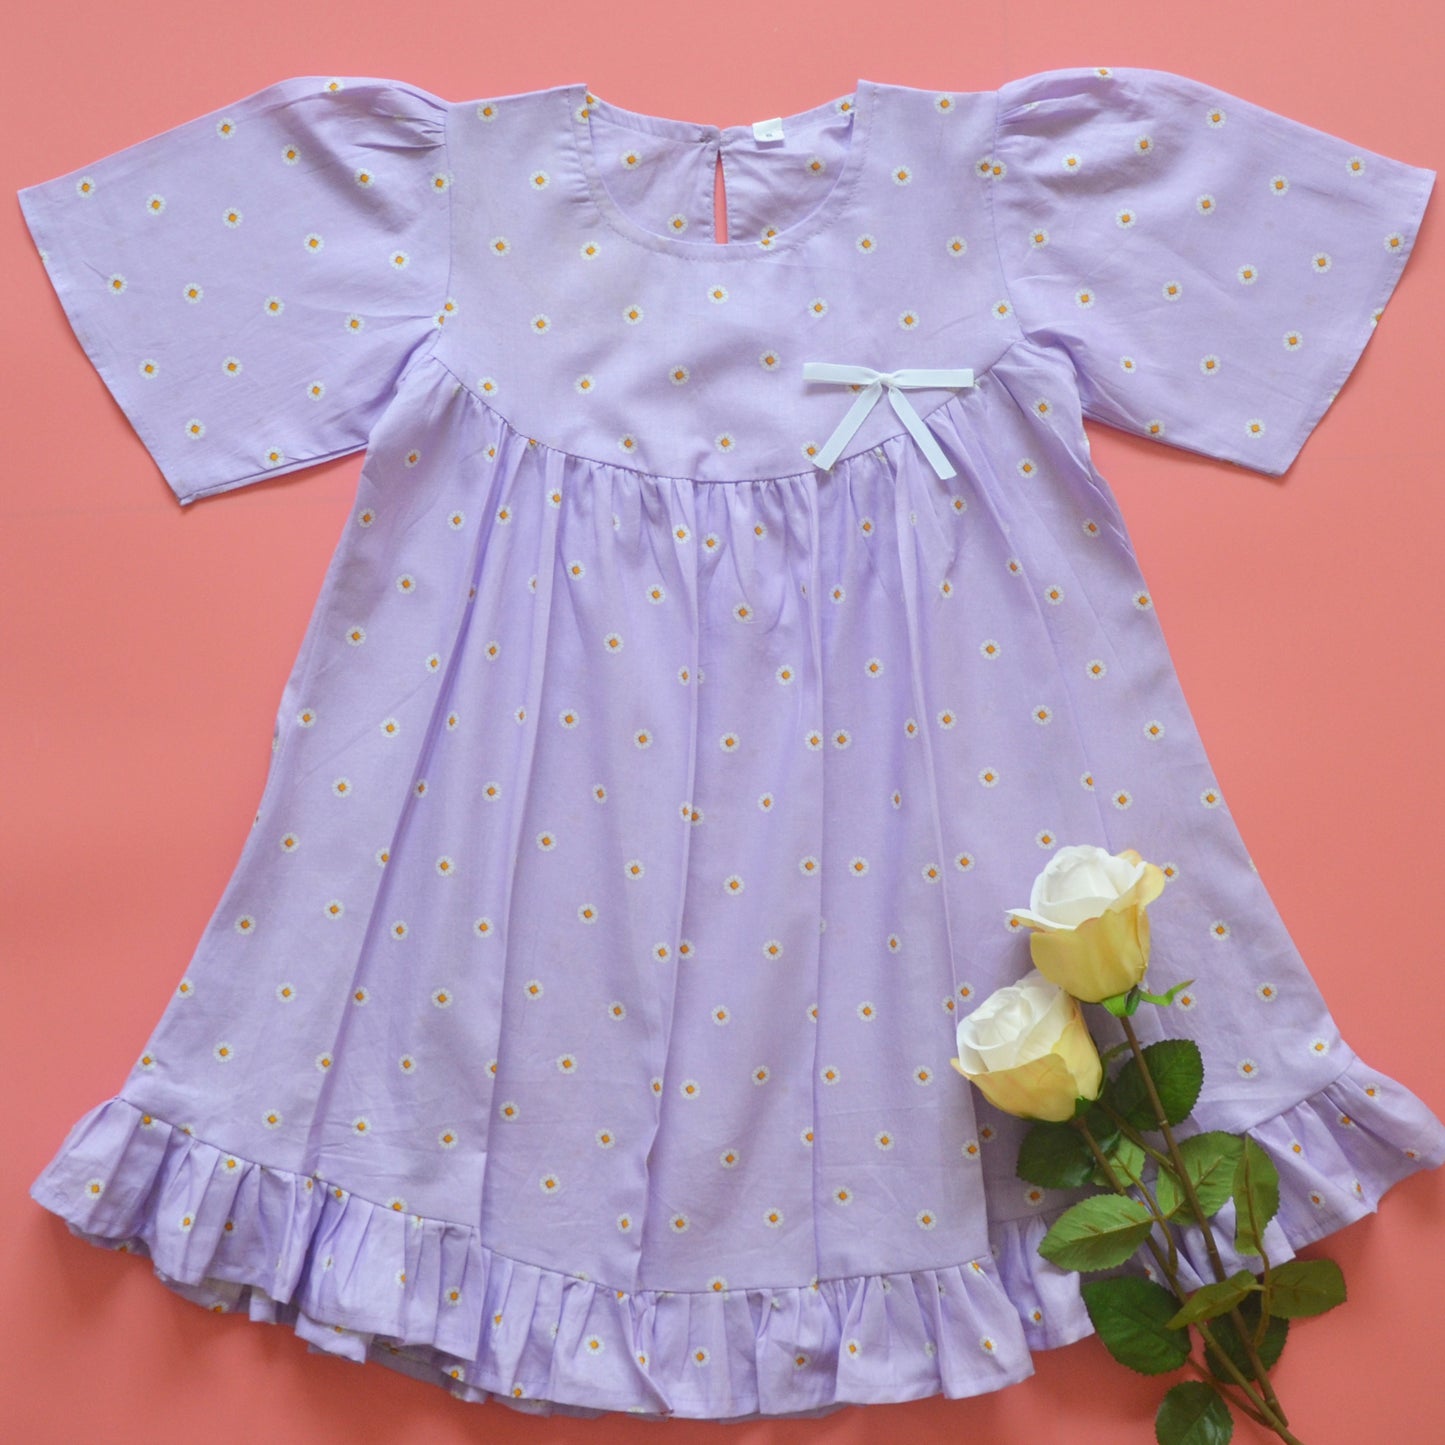 Hermione dress in daisy print with a cute ribbon bow - Purple